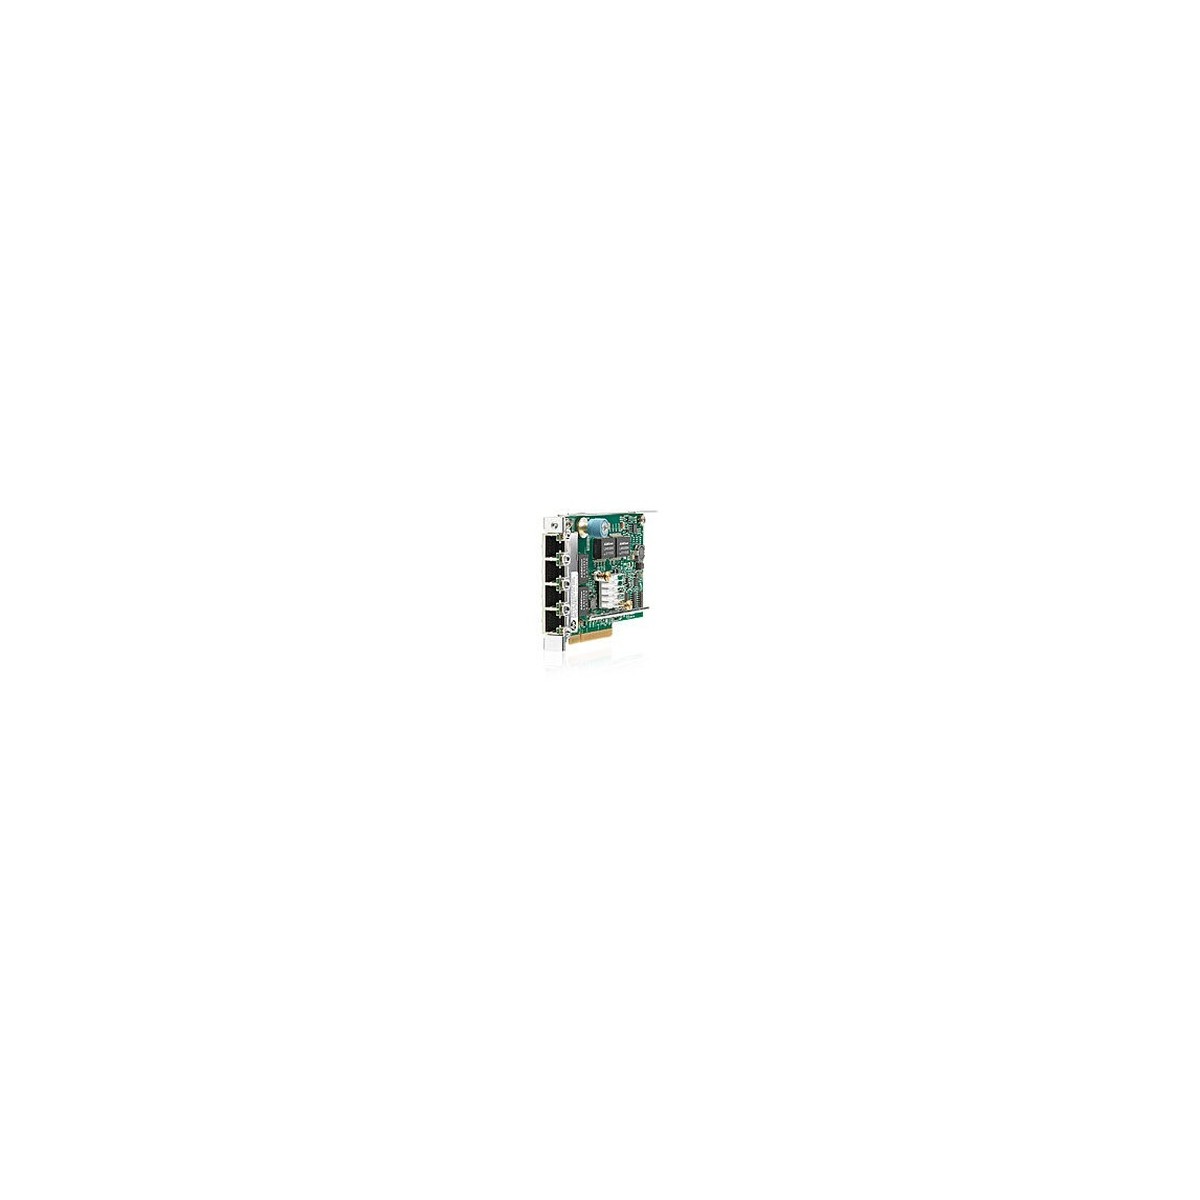 HPE 629135-B21 - Internal - Wired - PCI Express - Ethernet - Green - Grey